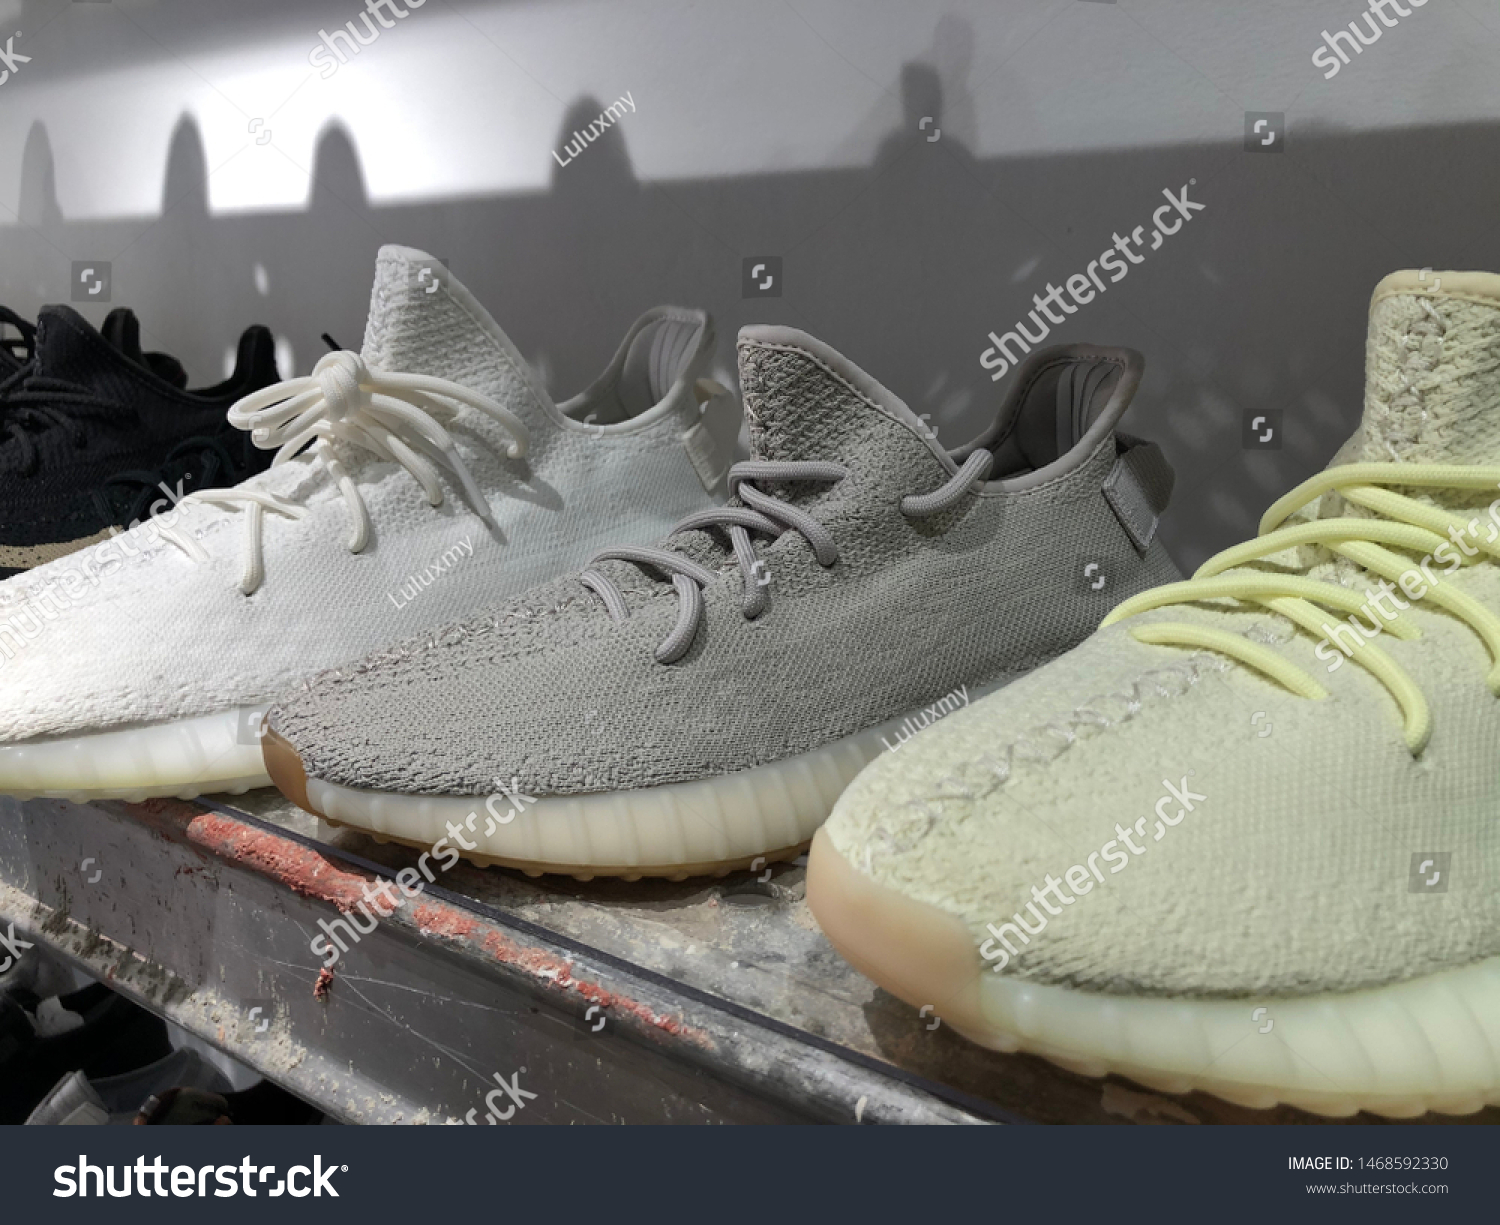 shoes called yeezys